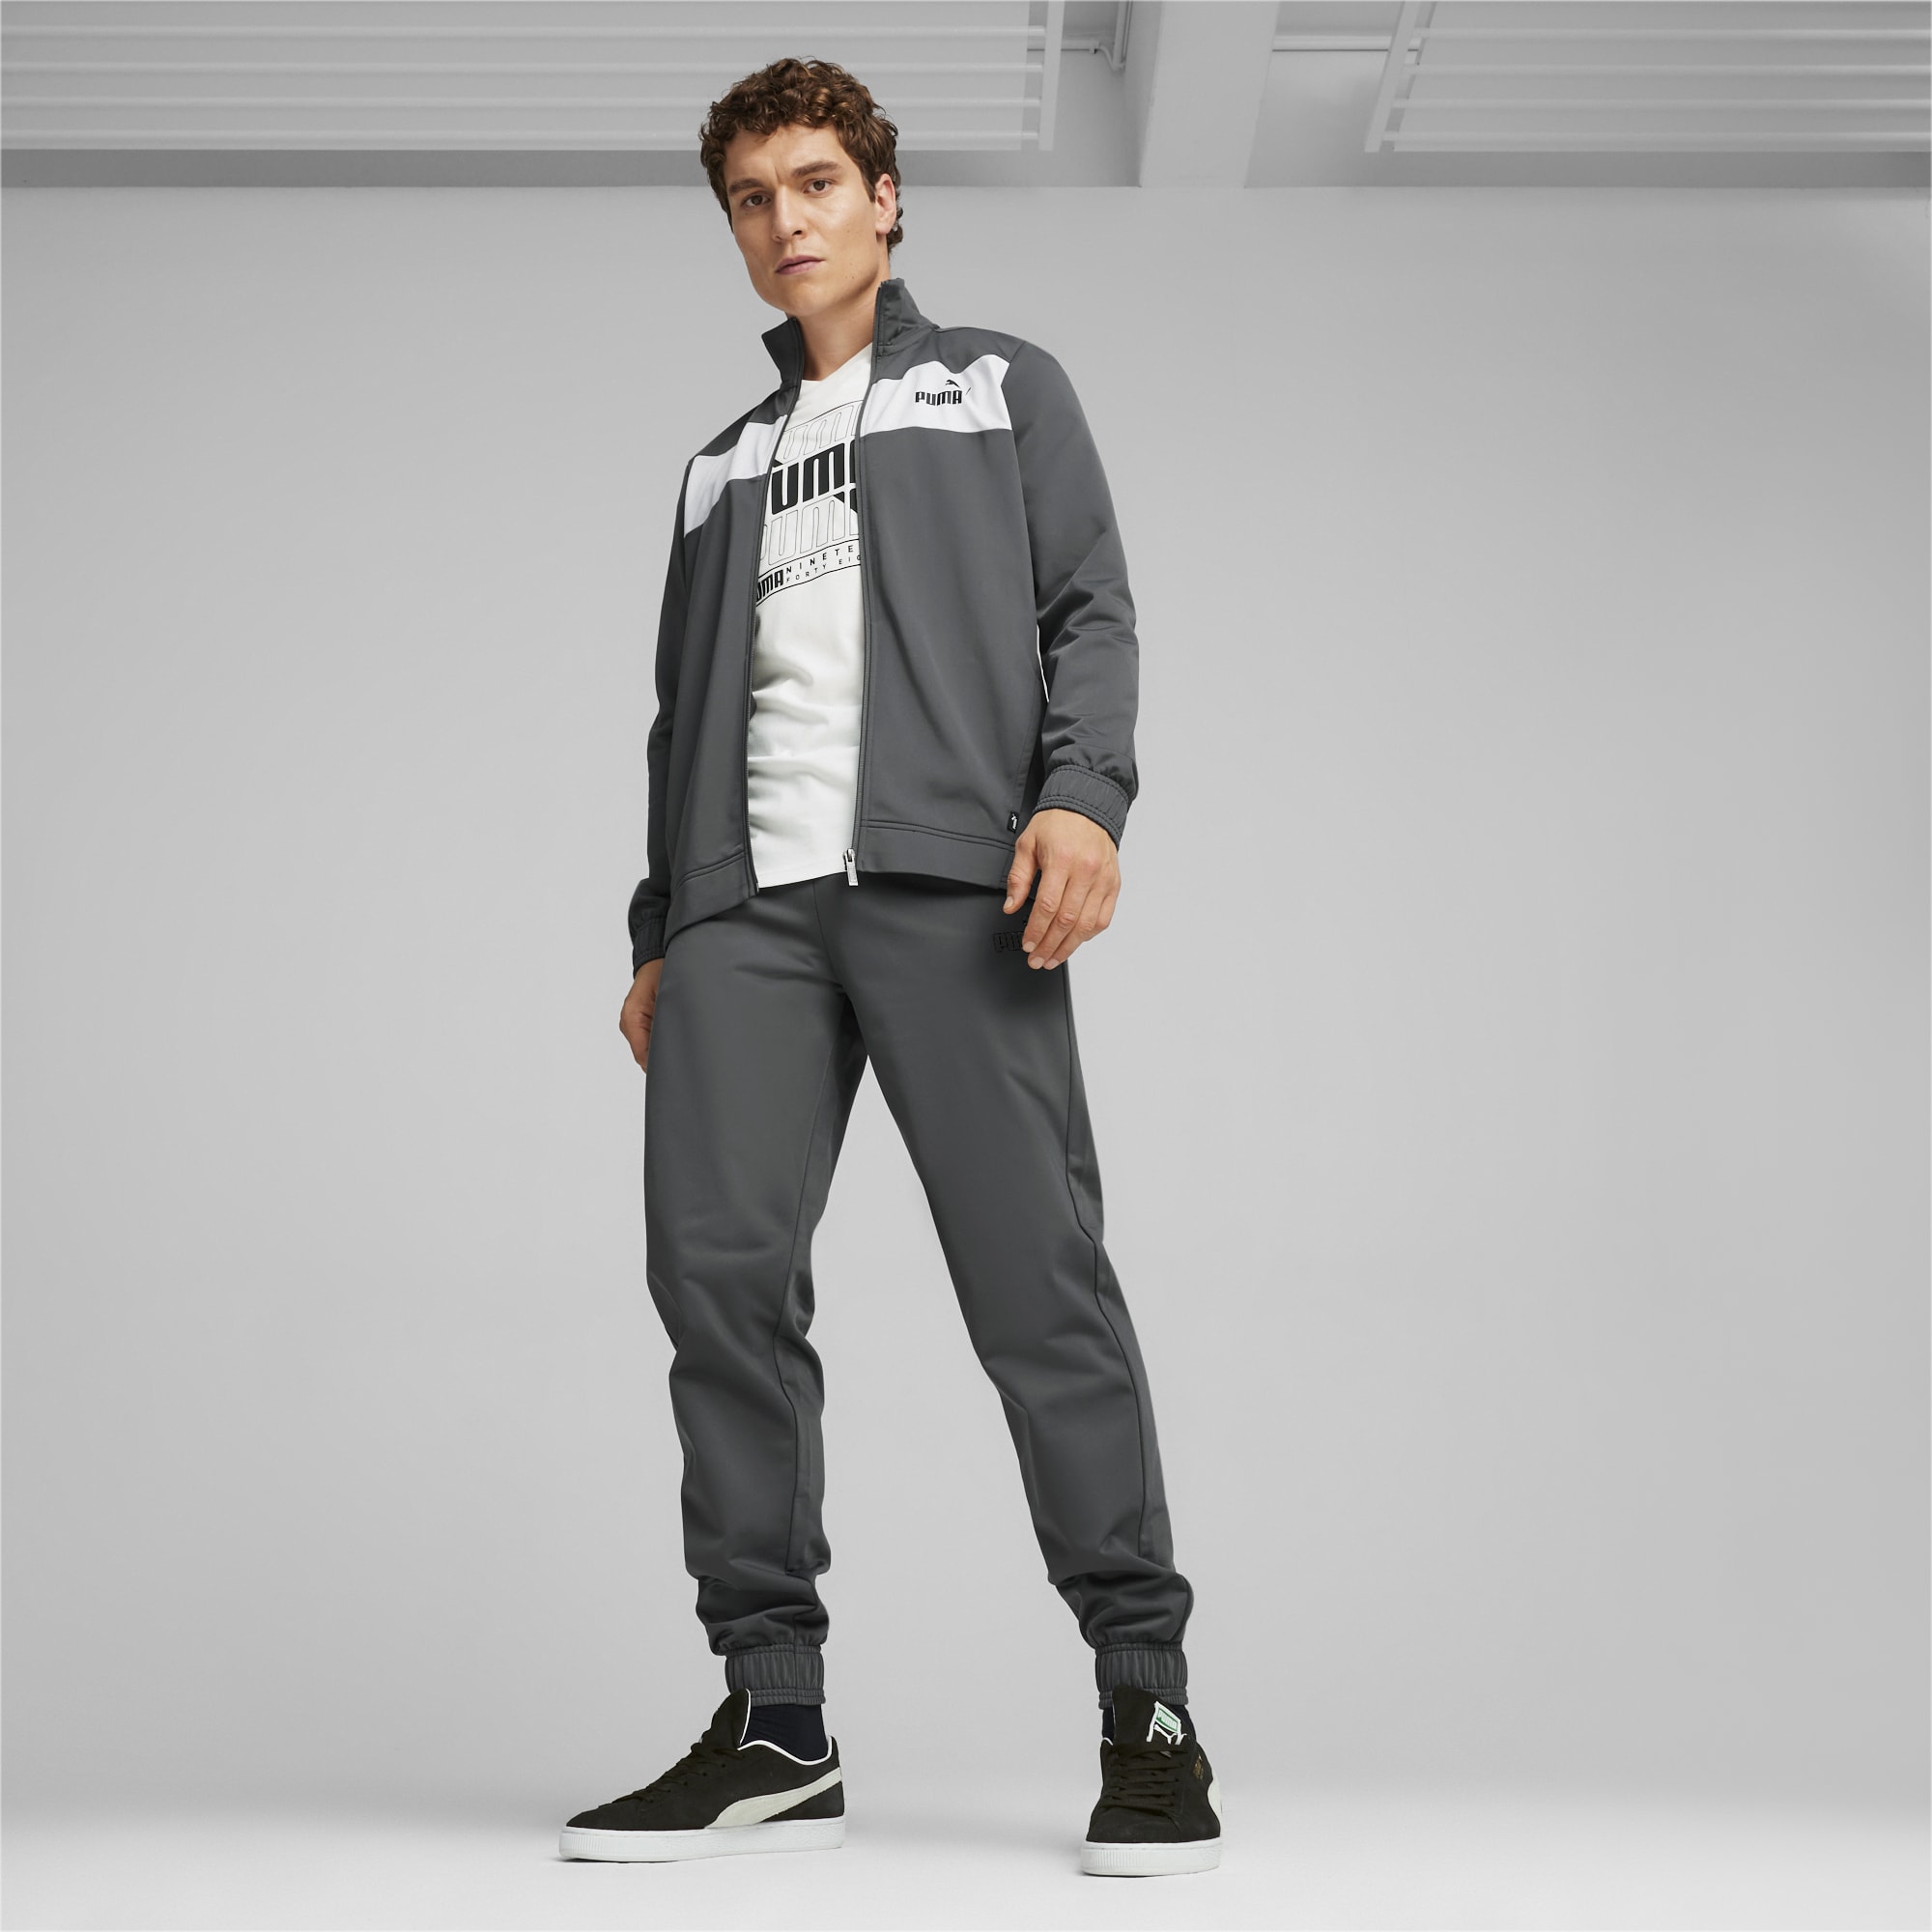 PUMA Men's Poly Tracksuit, Mineral Grey, Size S, Clothing